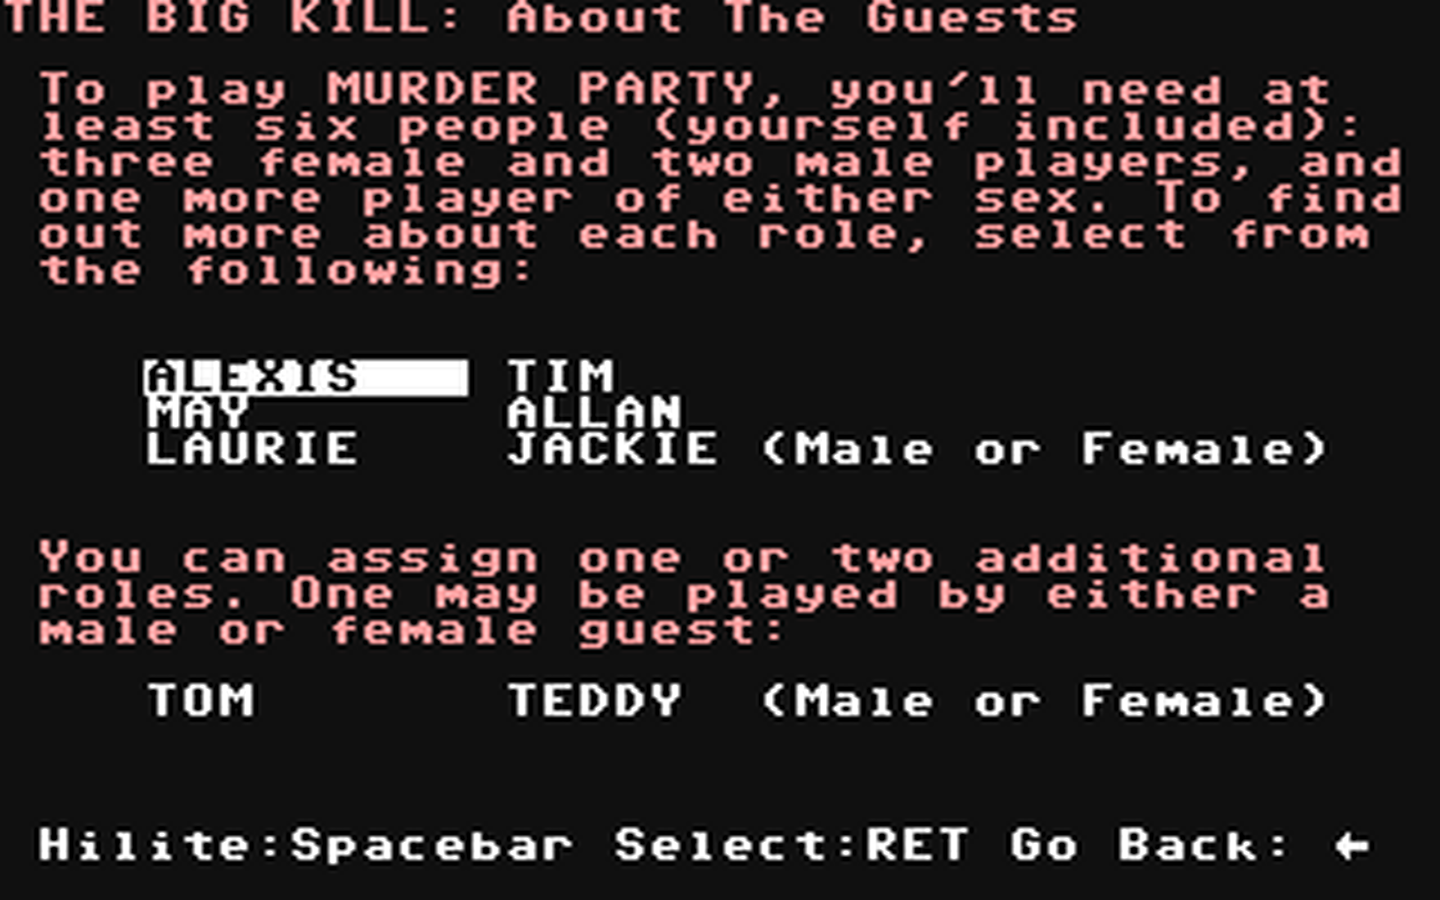 C64 GameBase Murder_Party Electronic_Arts 1986